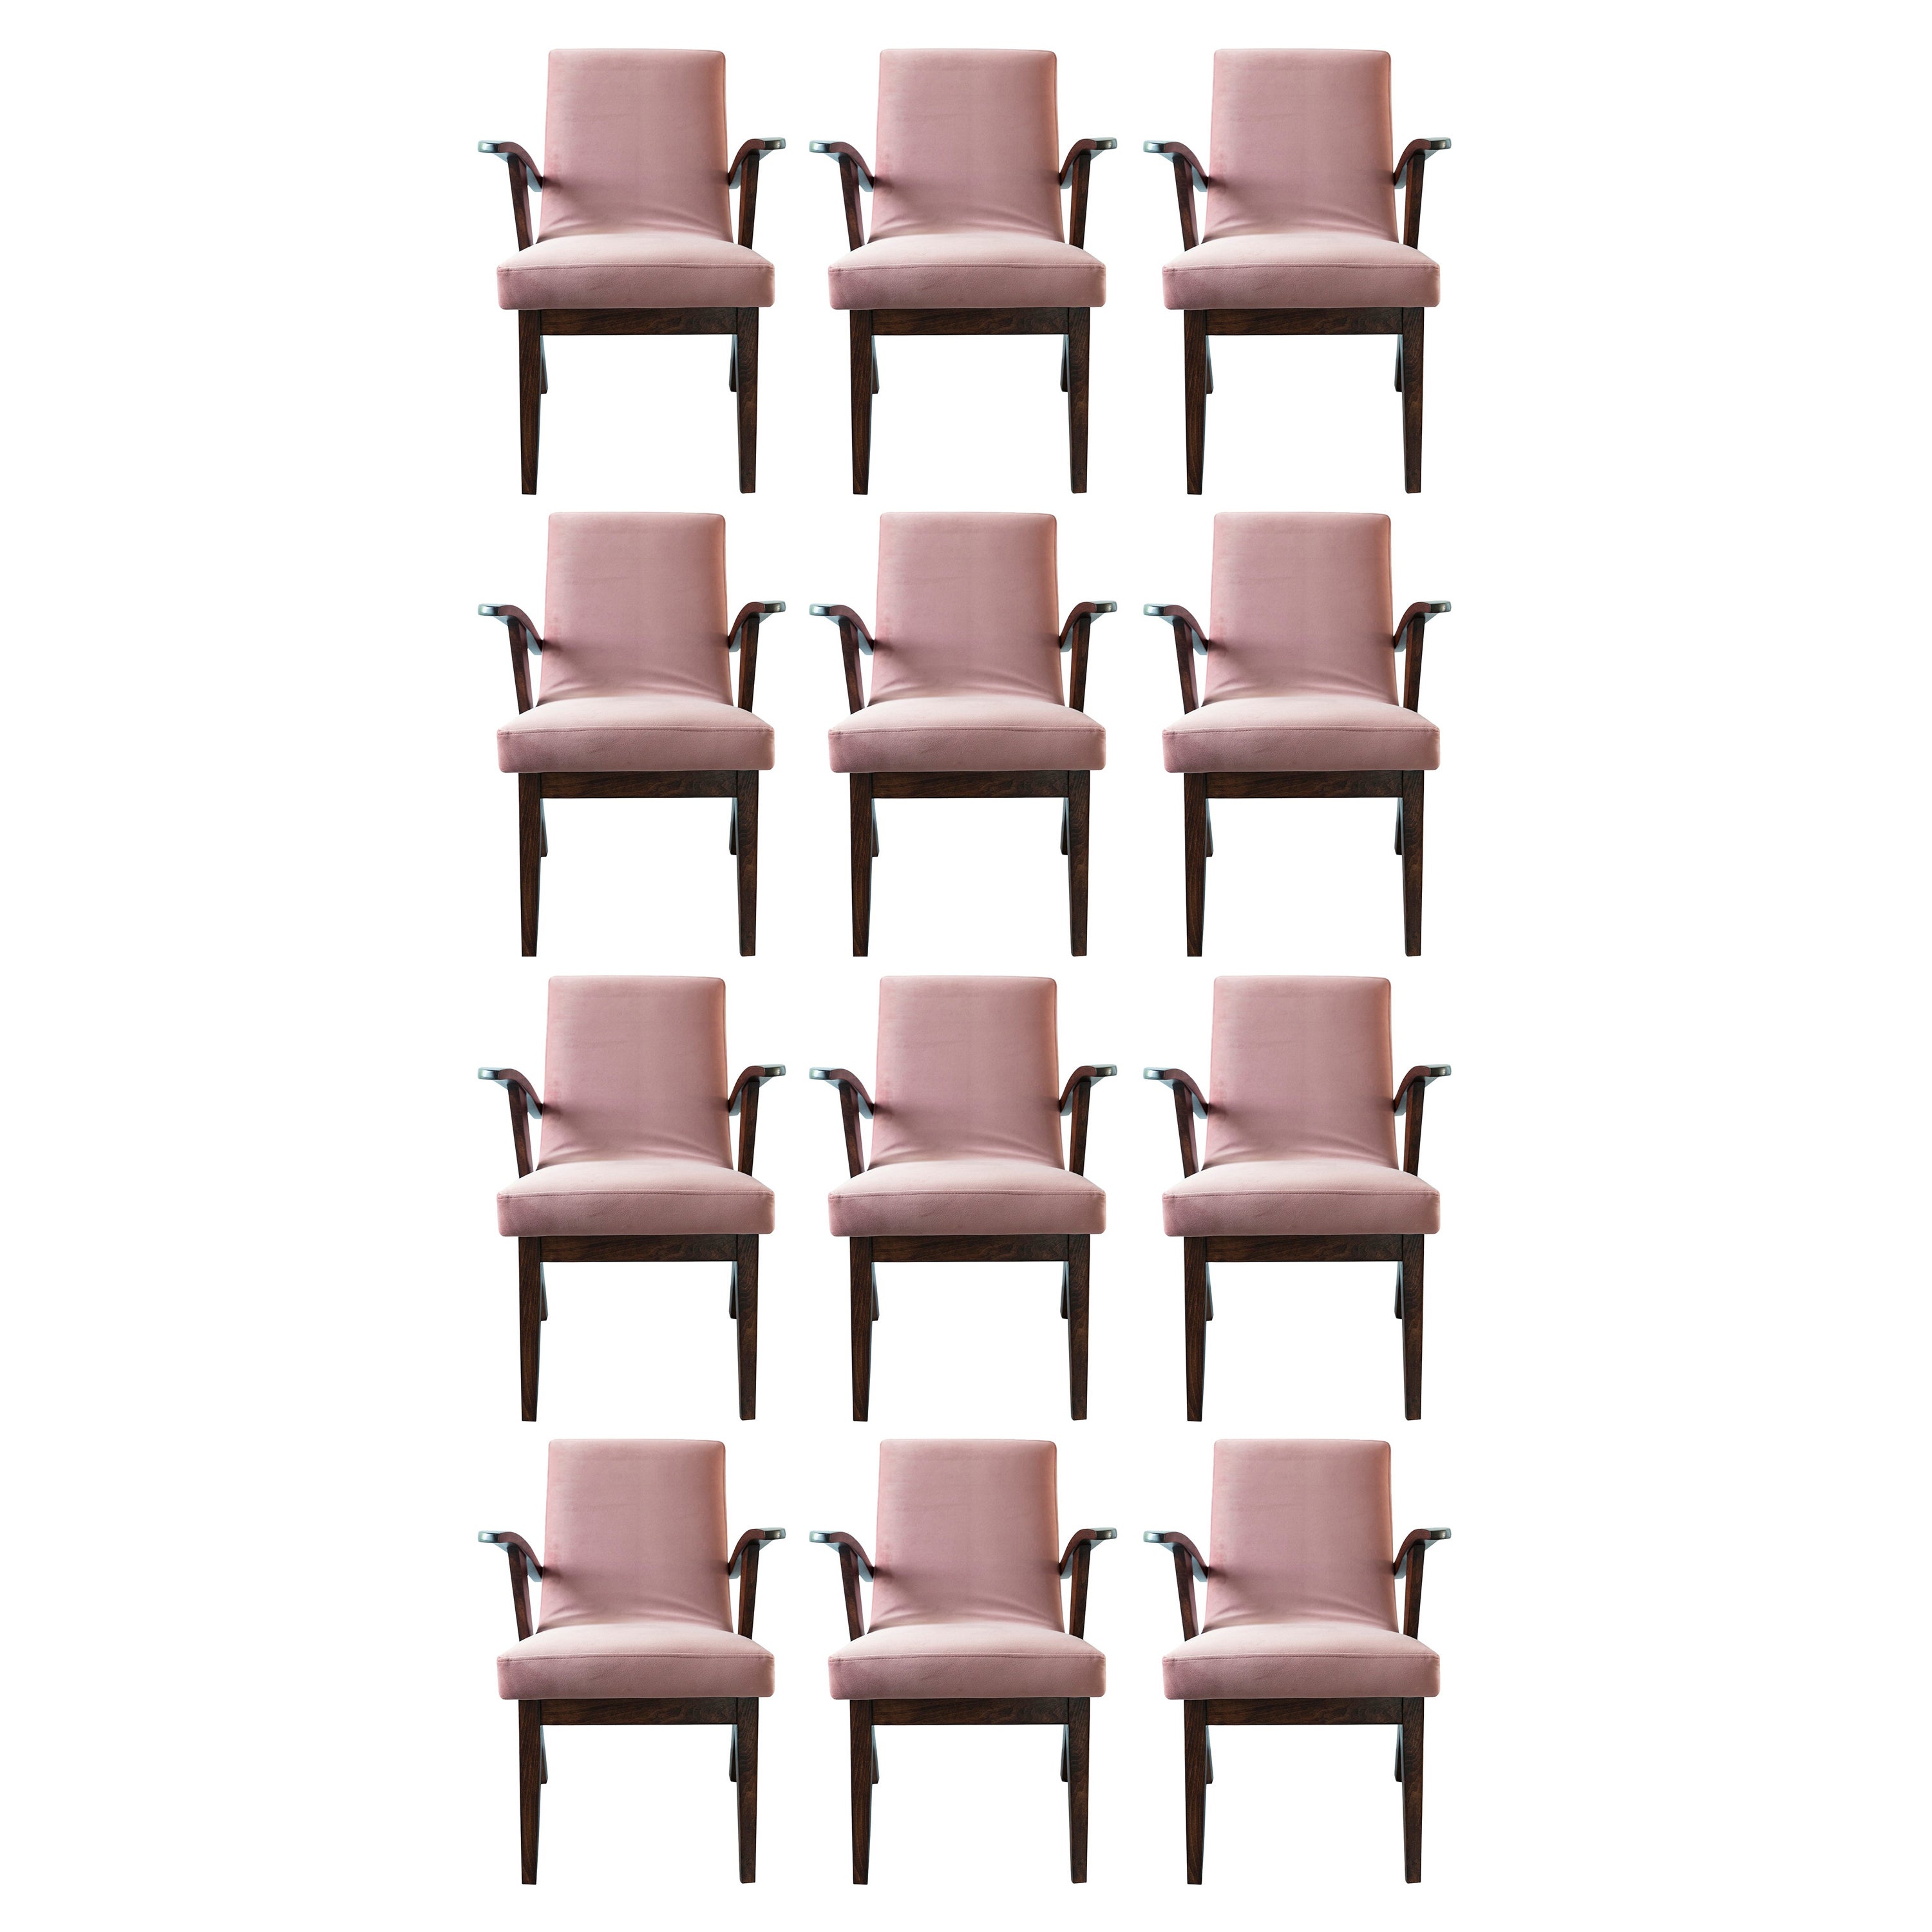 Twelve 20th Century Armchairs in Dusty Pink Velvet by Mieczyslaw Puchala, 1960s For Sale